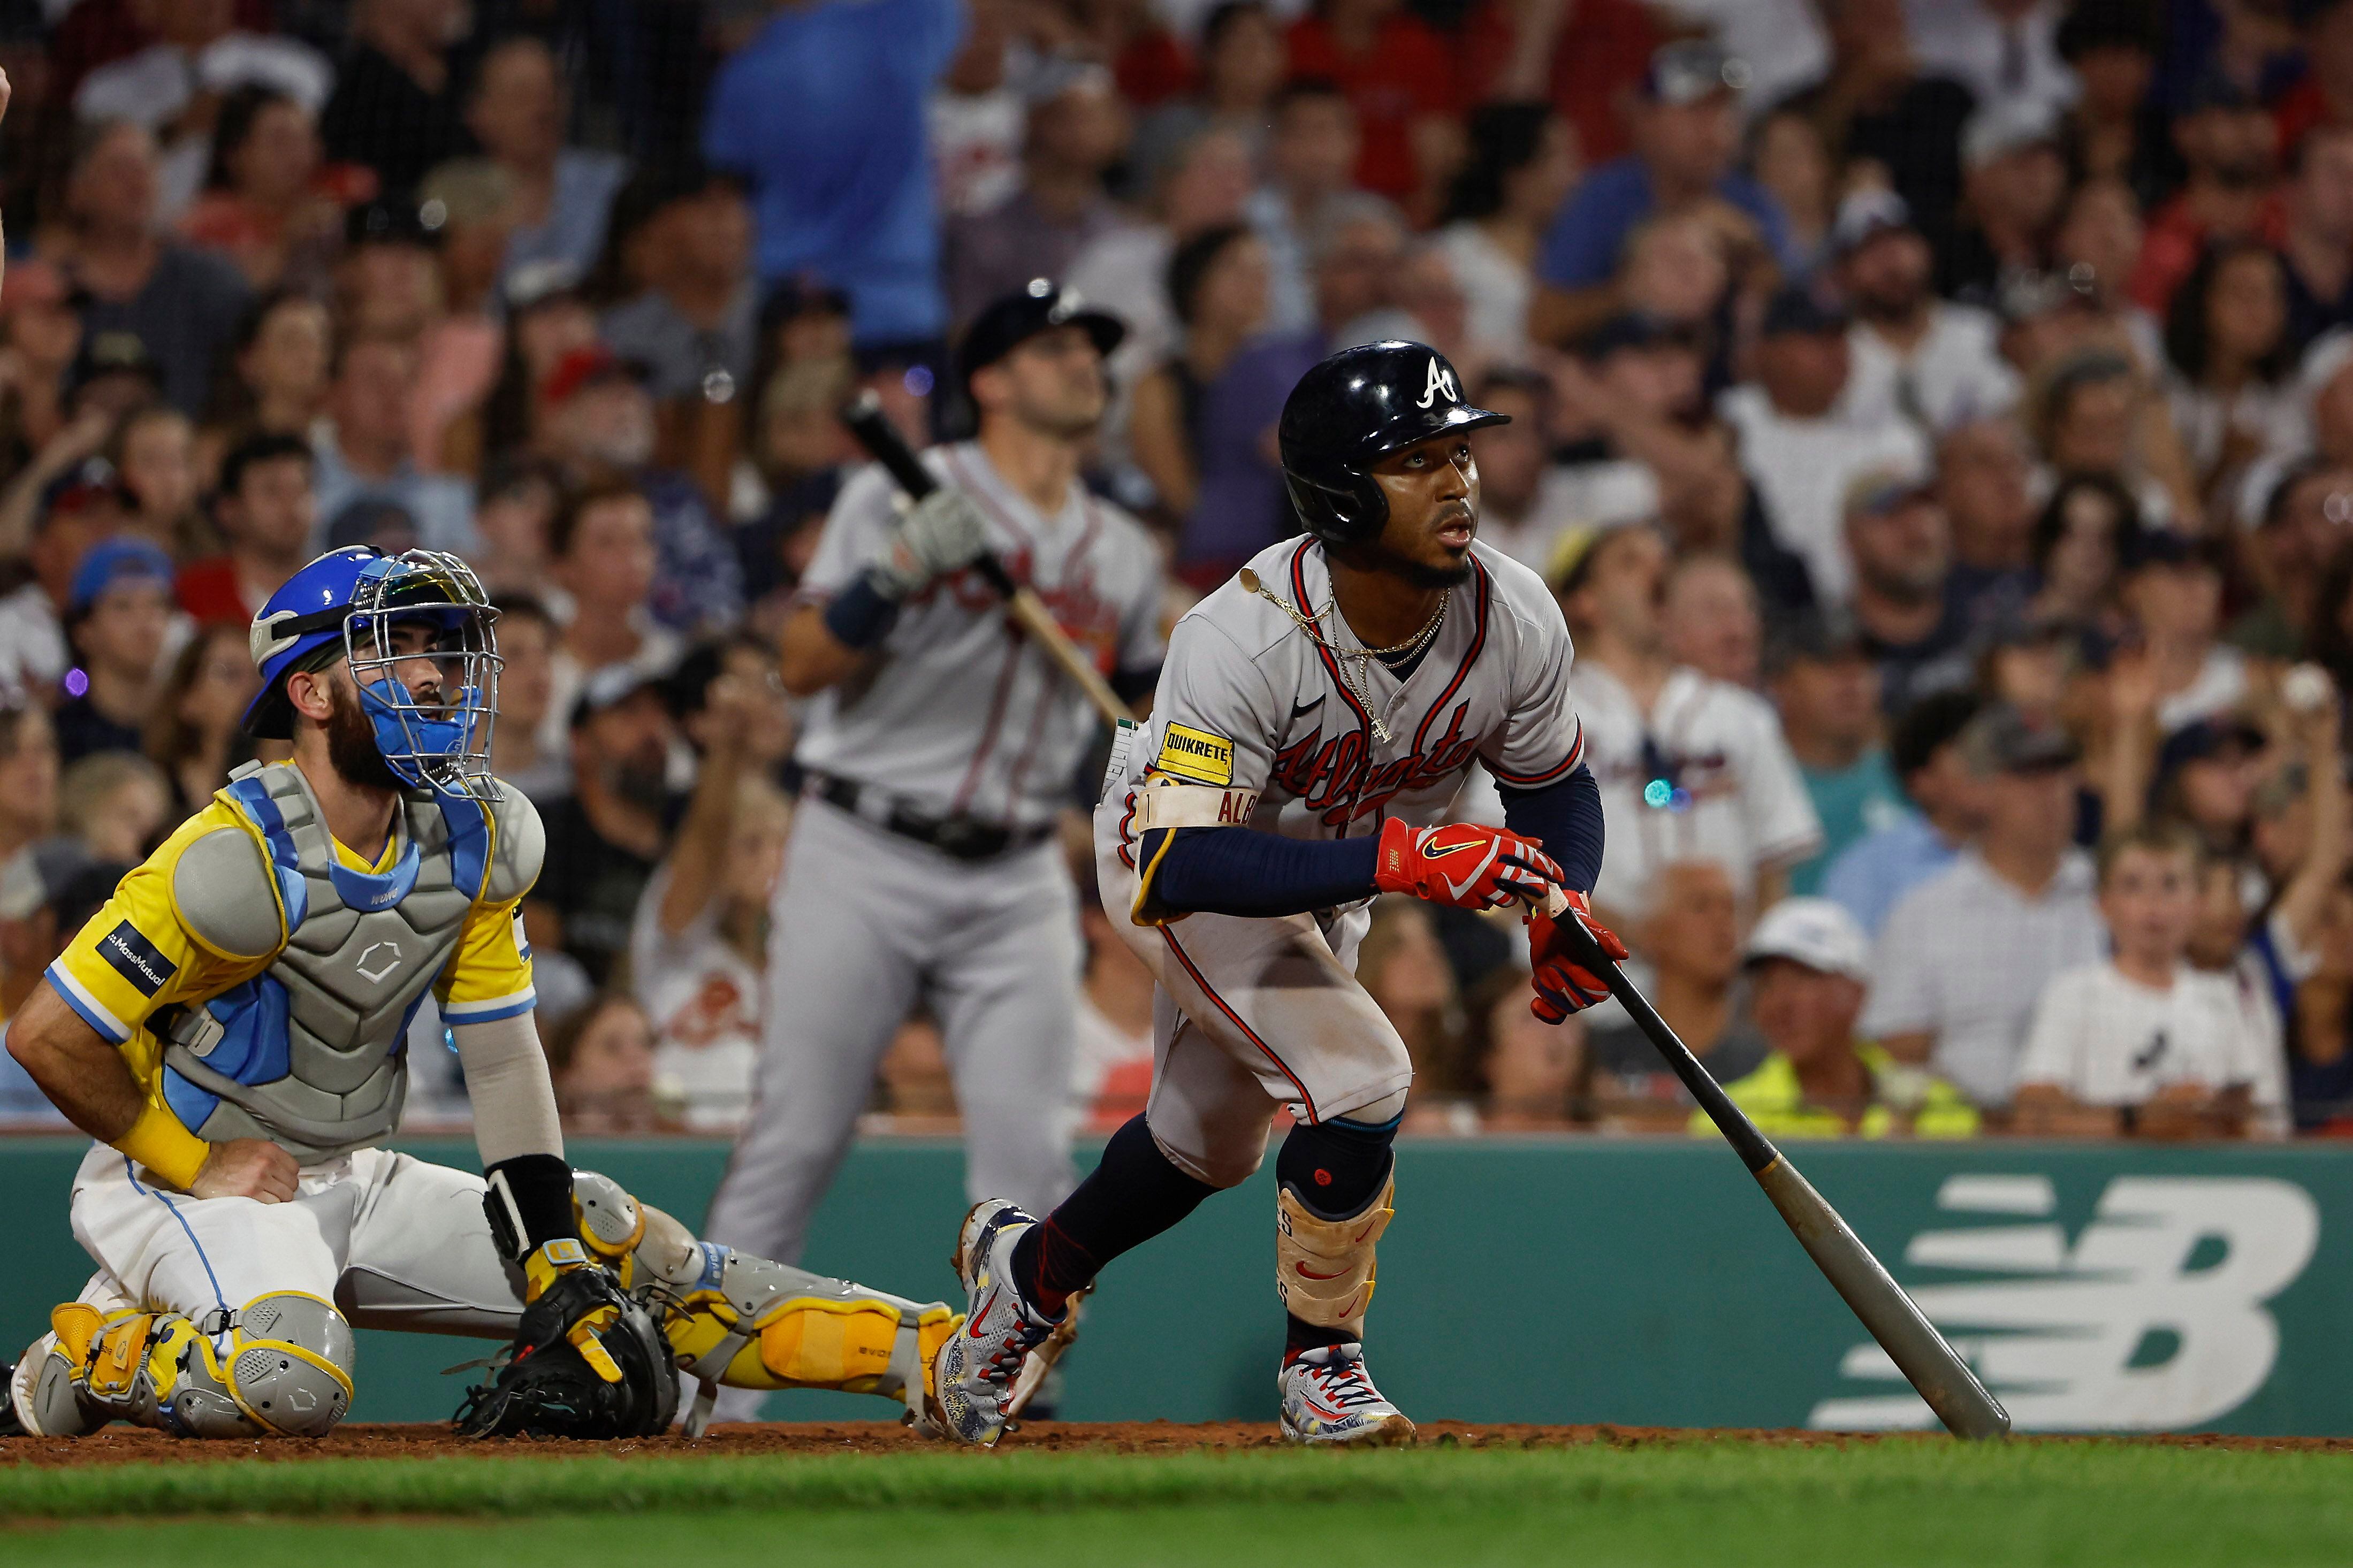 Red Sox rally for five runs late to beat Braves 5-3, sweep series